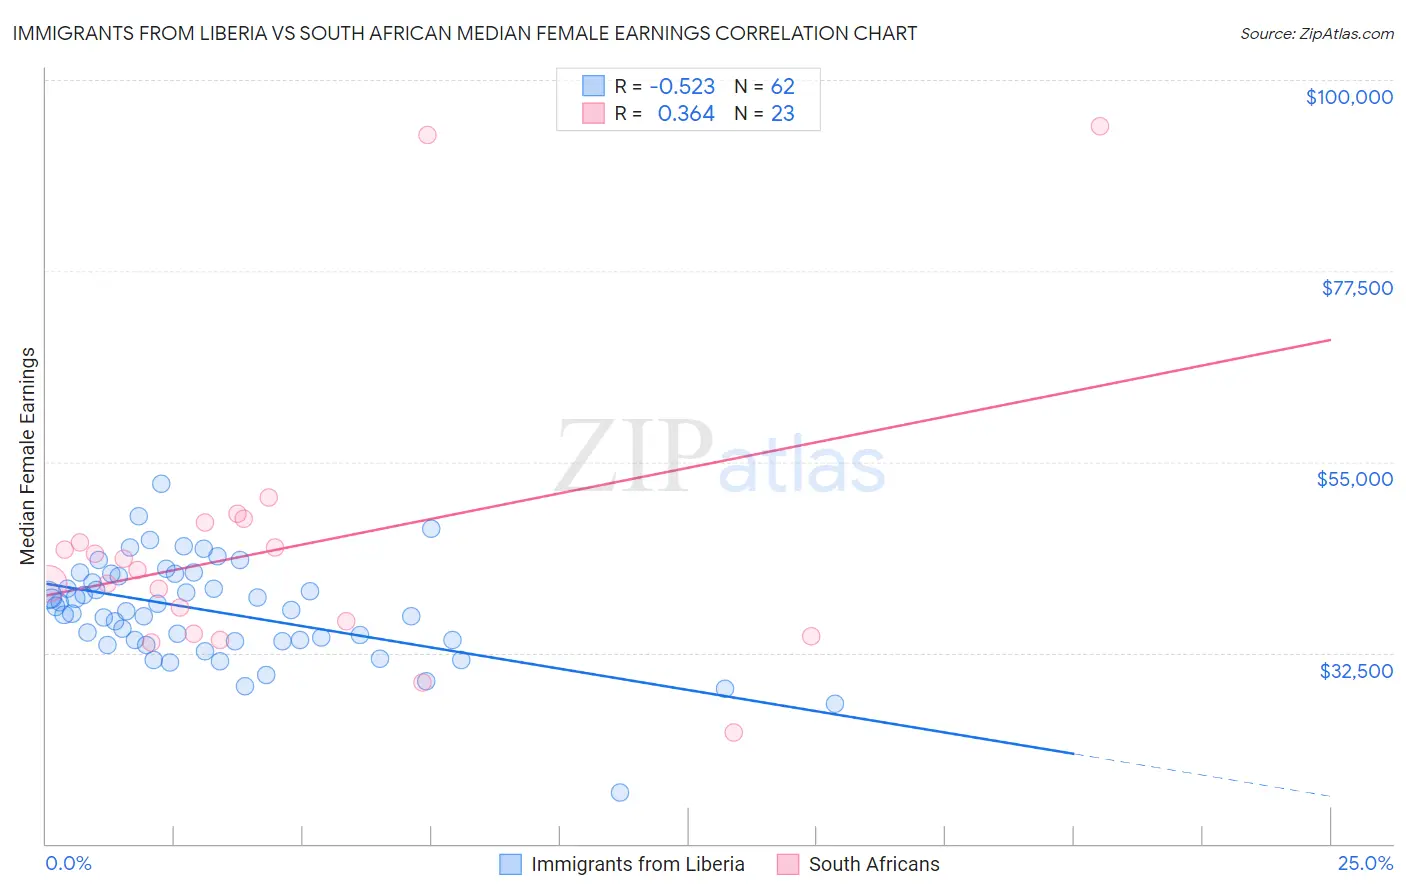 Immigrants from Liberia vs South African Median Female Earnings